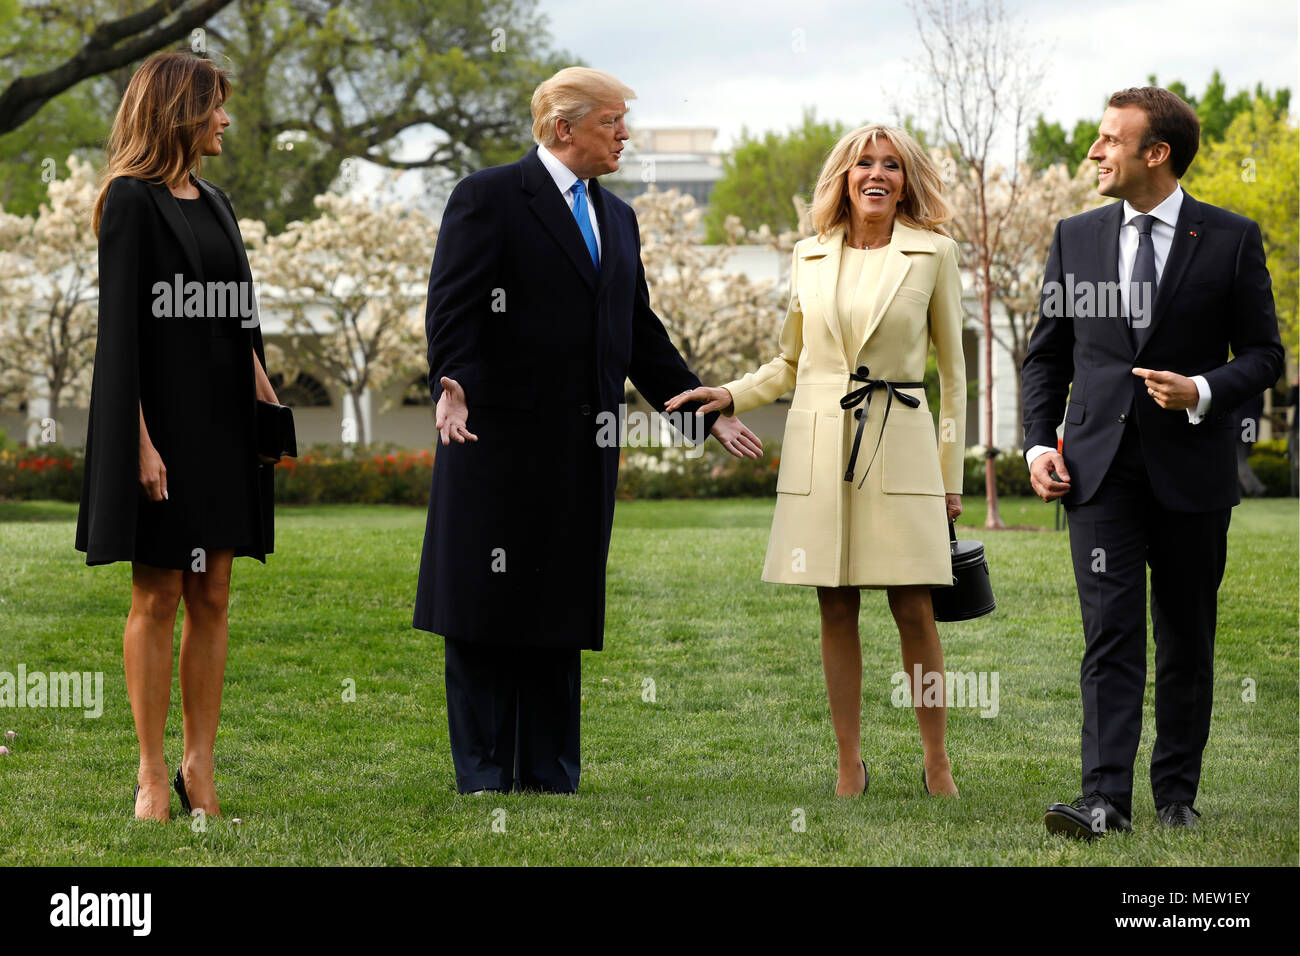 U.S. President Donald Trump with France's president Emmanuel Macron and First Ladies Melania Trump and Brigitte Macron arrive to plant a tree, a gift from the President and Mrs. Macron, on the South Lawn of the White House in Washington, DC, U.S., on Monday, April 23, 2018. As Macron arrives for the first state visit of Trump's presidency, the U.S. leader is threatening to upend the global trading system with tariffs on China, maybe Europe too. Credit: Yuri Gripas/Pool via CNP /MediaPunch Stock Photo